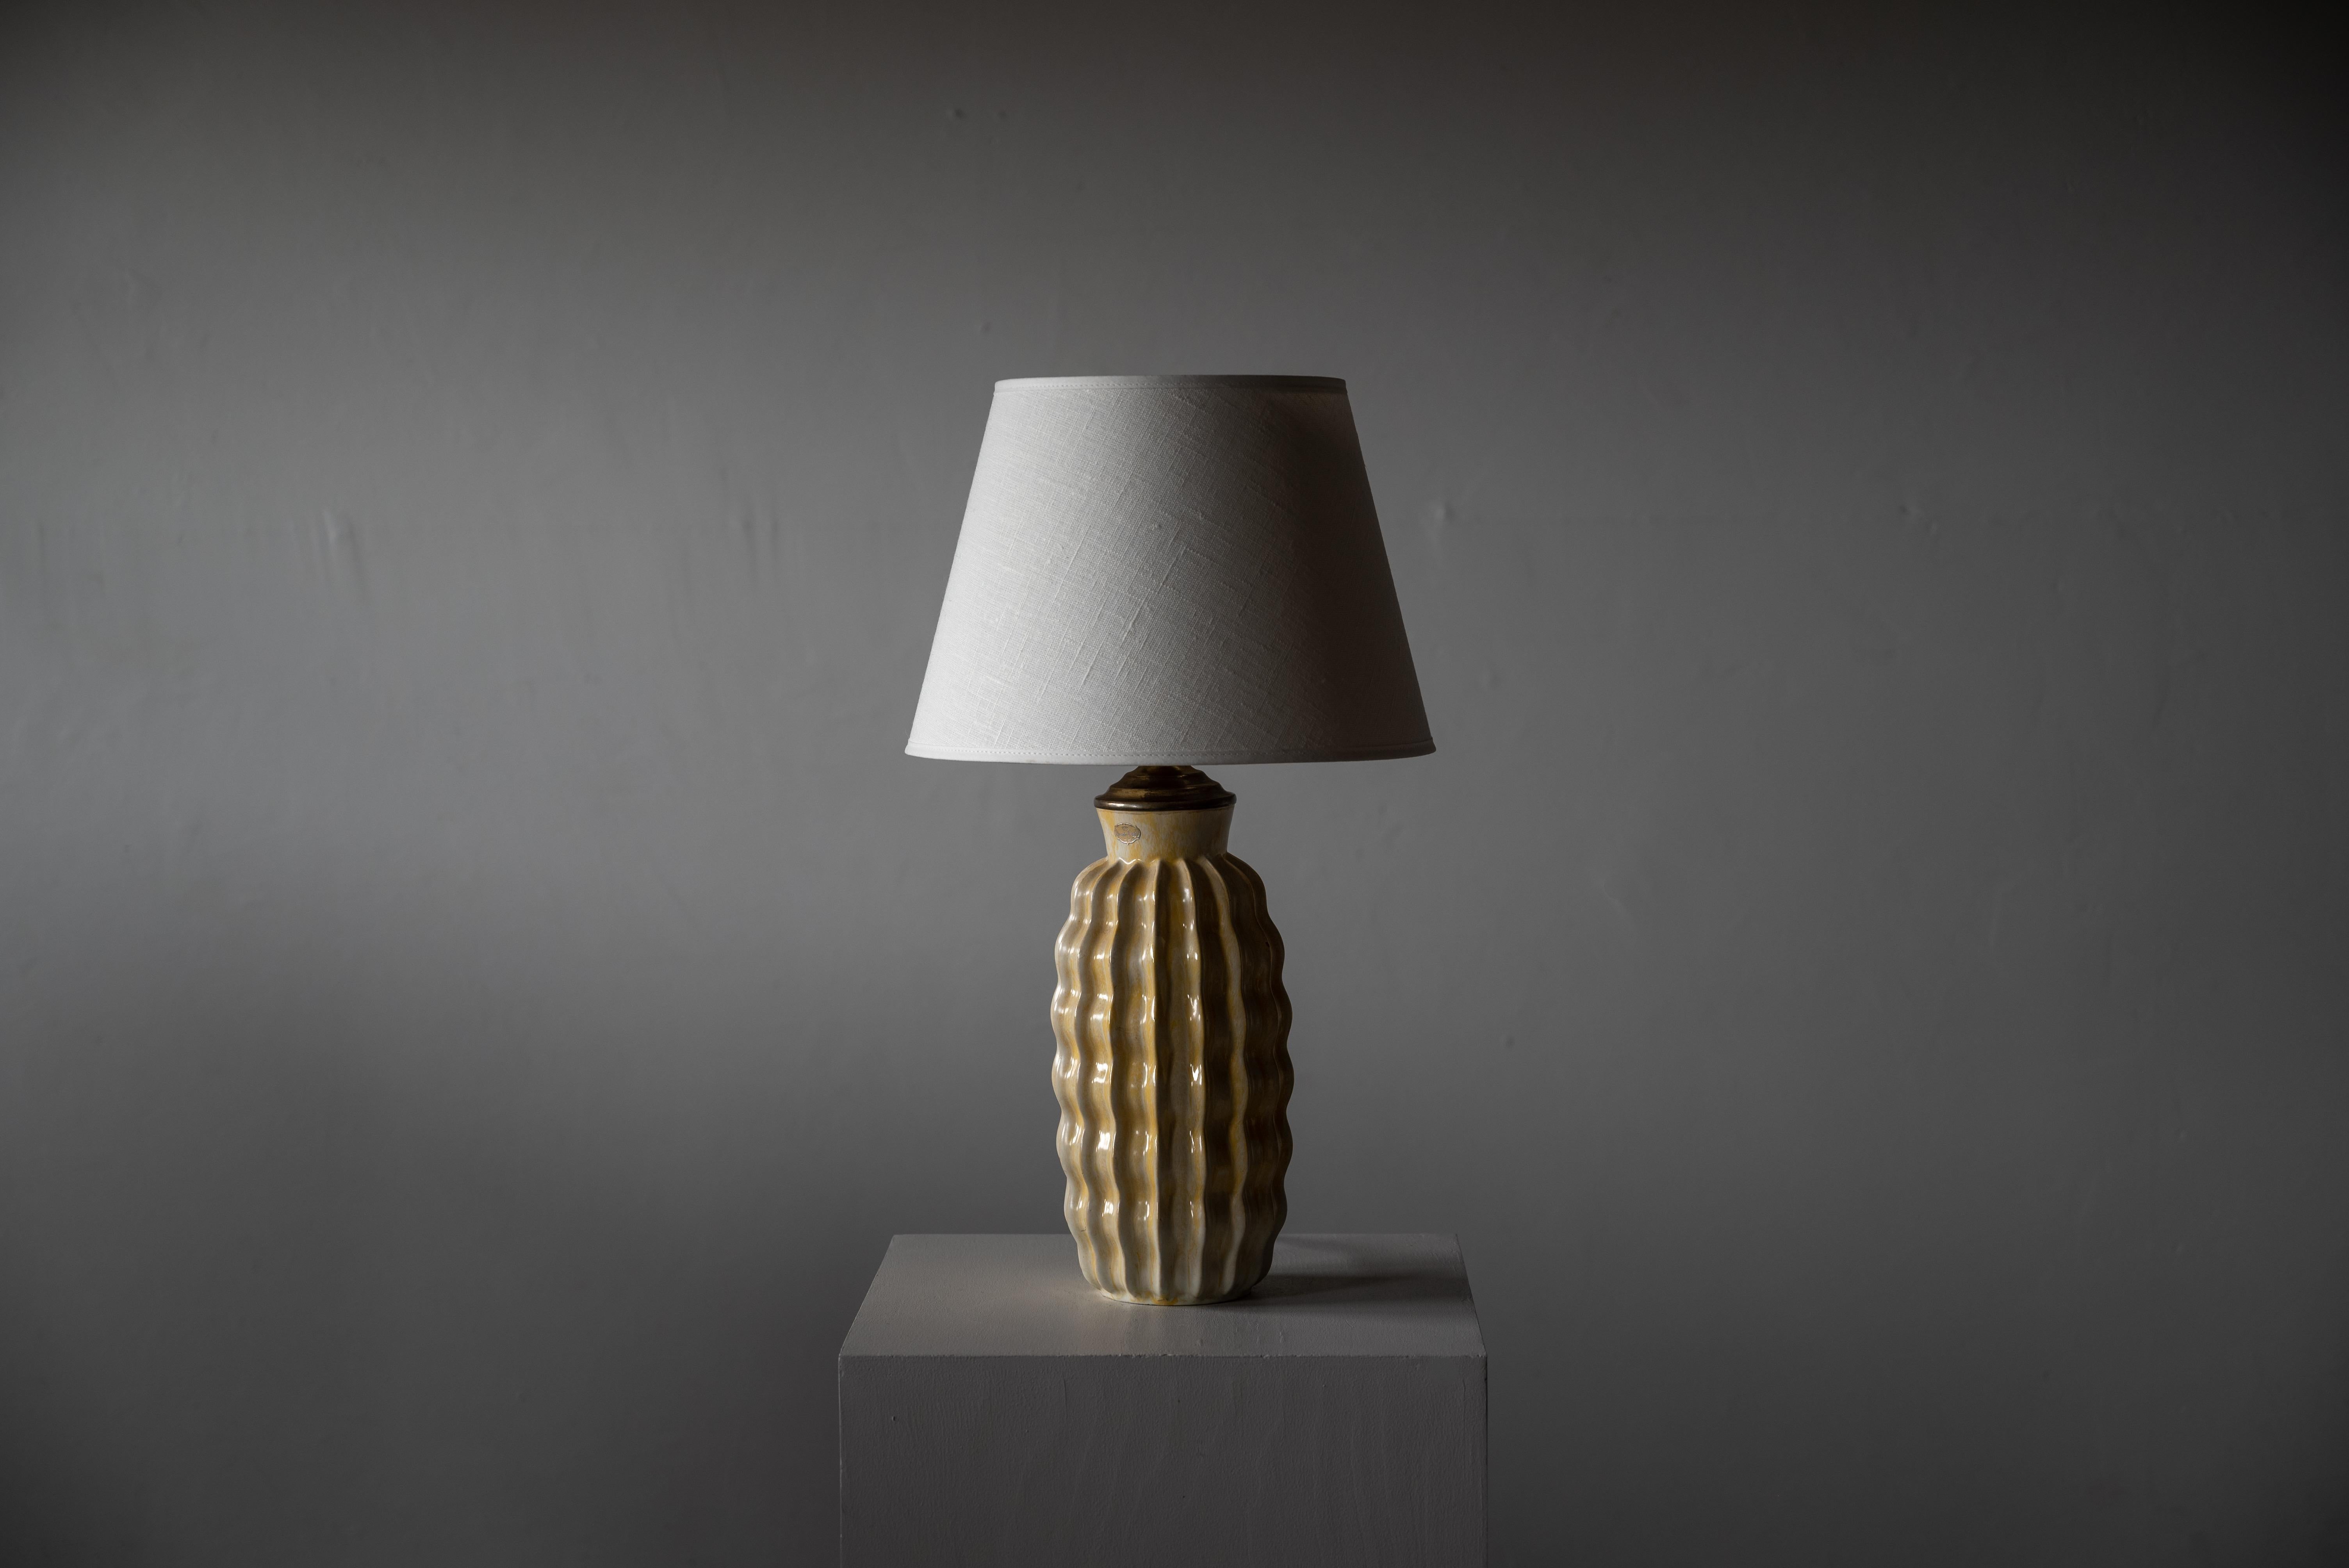 An early modernist table lamp. Designed by Anna-Lisa Thomson, for Upsala-Ekeby, Sweden, 1940s. Signed.

Sold without lampshade. Dimensions exclude lampshade. Height includes harp. 

Other designers of the period include Ettore Sottsass, Carl